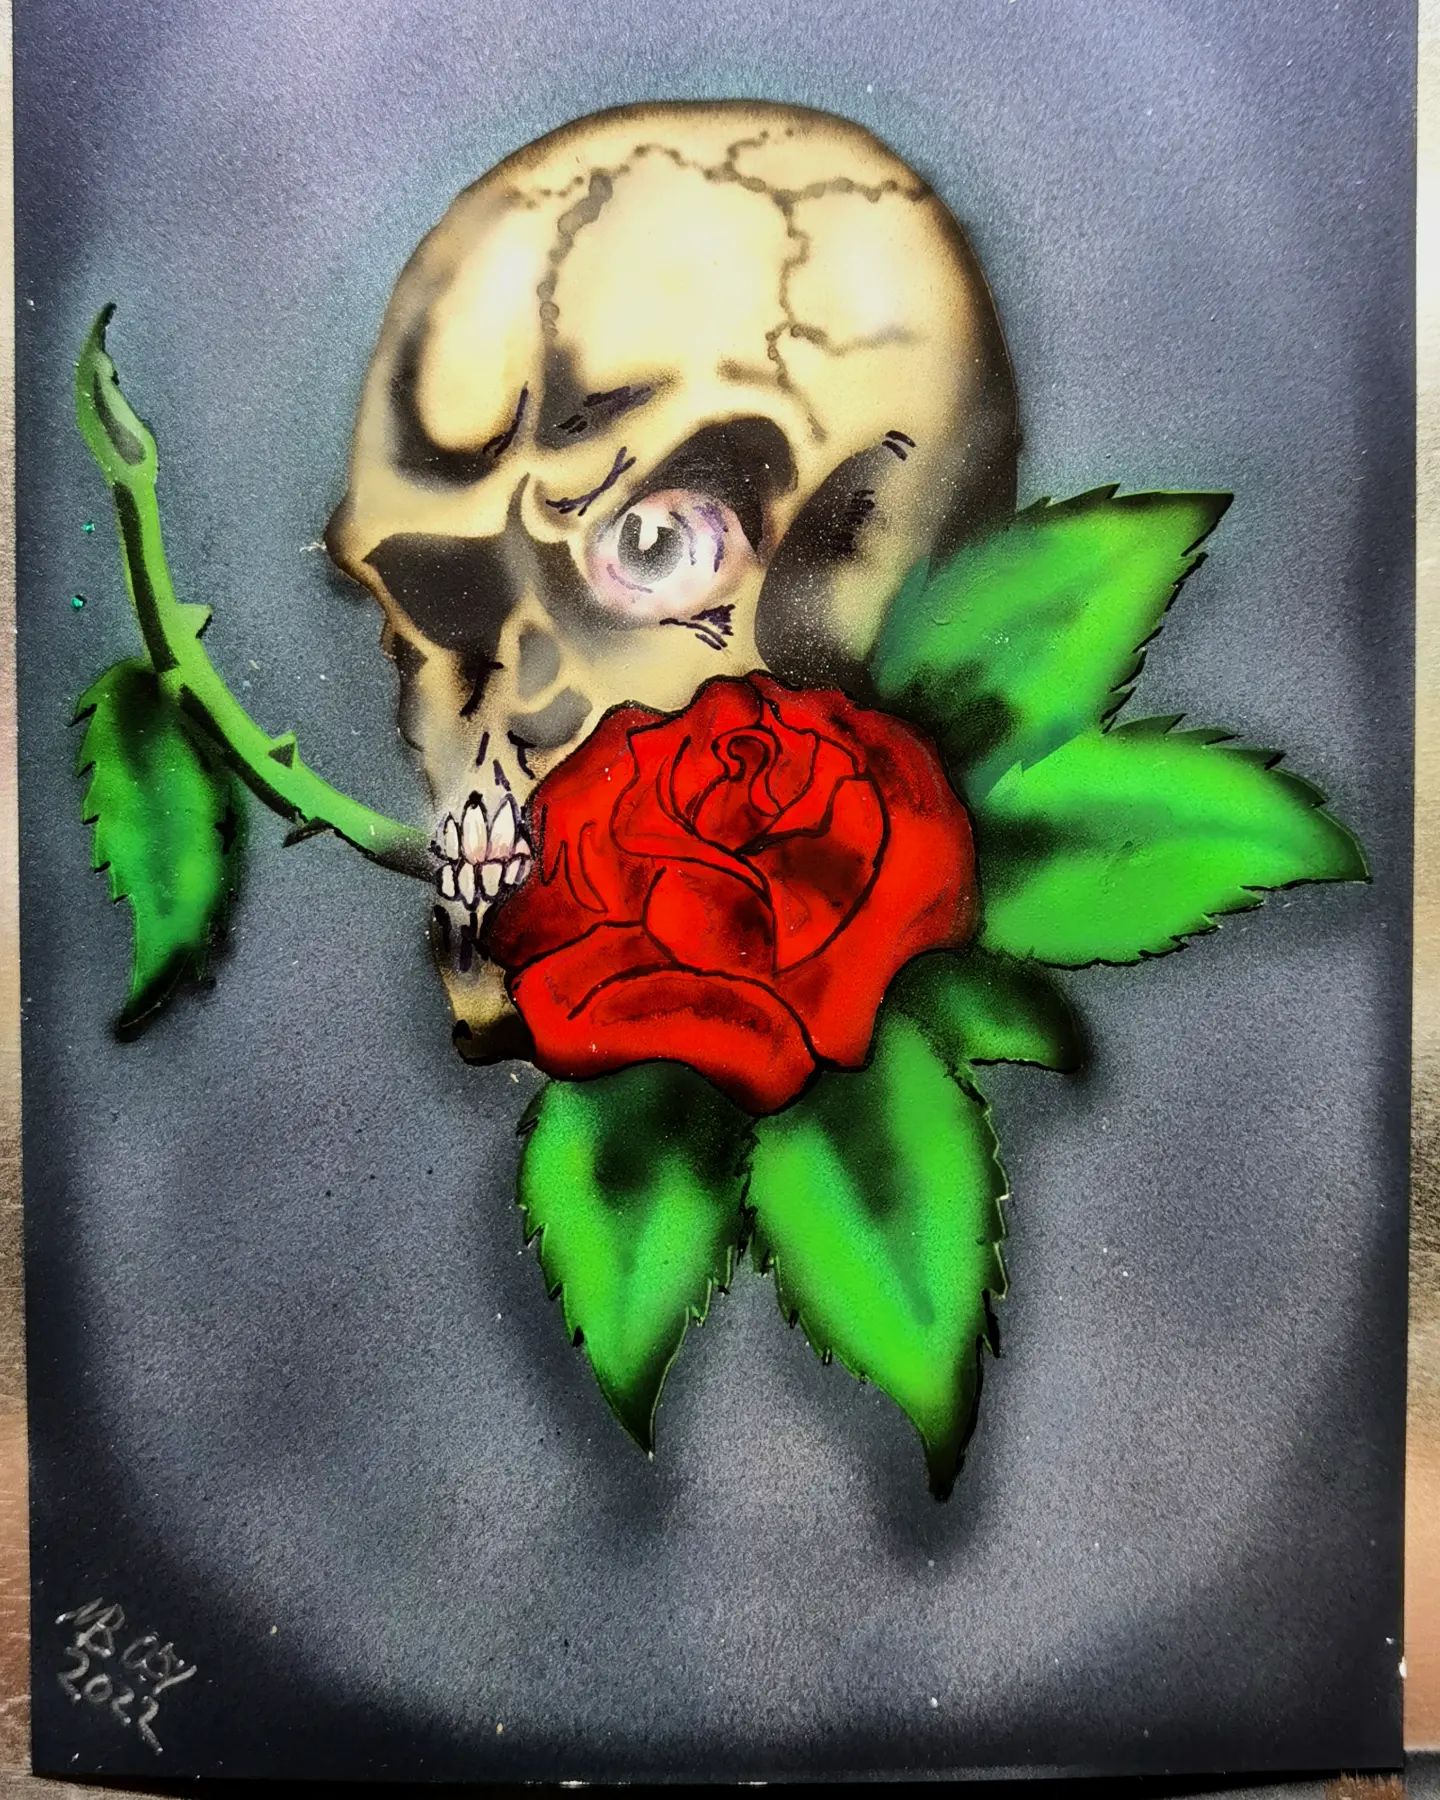 Airbrushed Skull with a rose. 
On sythetic Paper. Made with selfcutted stencils.  #airbrush #vallejo #art #syntheticpaper #painting #skull #rose #schädel #darkart #kunst #createxcolors #diy #airbrushing #airbrushart #luftpinsel #totenschädel #phantasyart